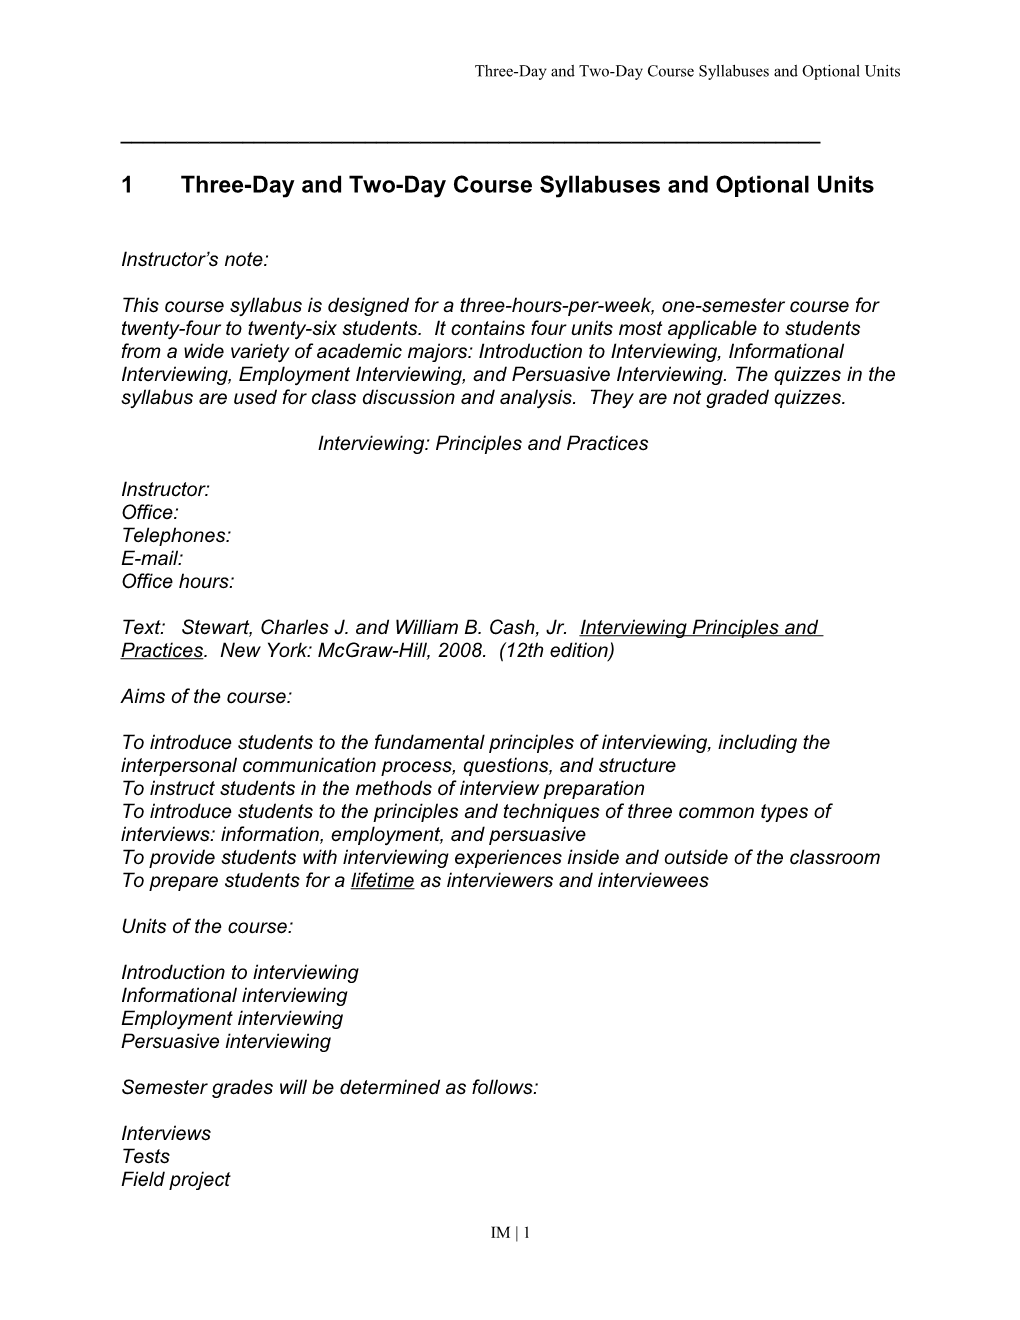 Three-Day and Two-Day Course Syllabuses and Optional Units